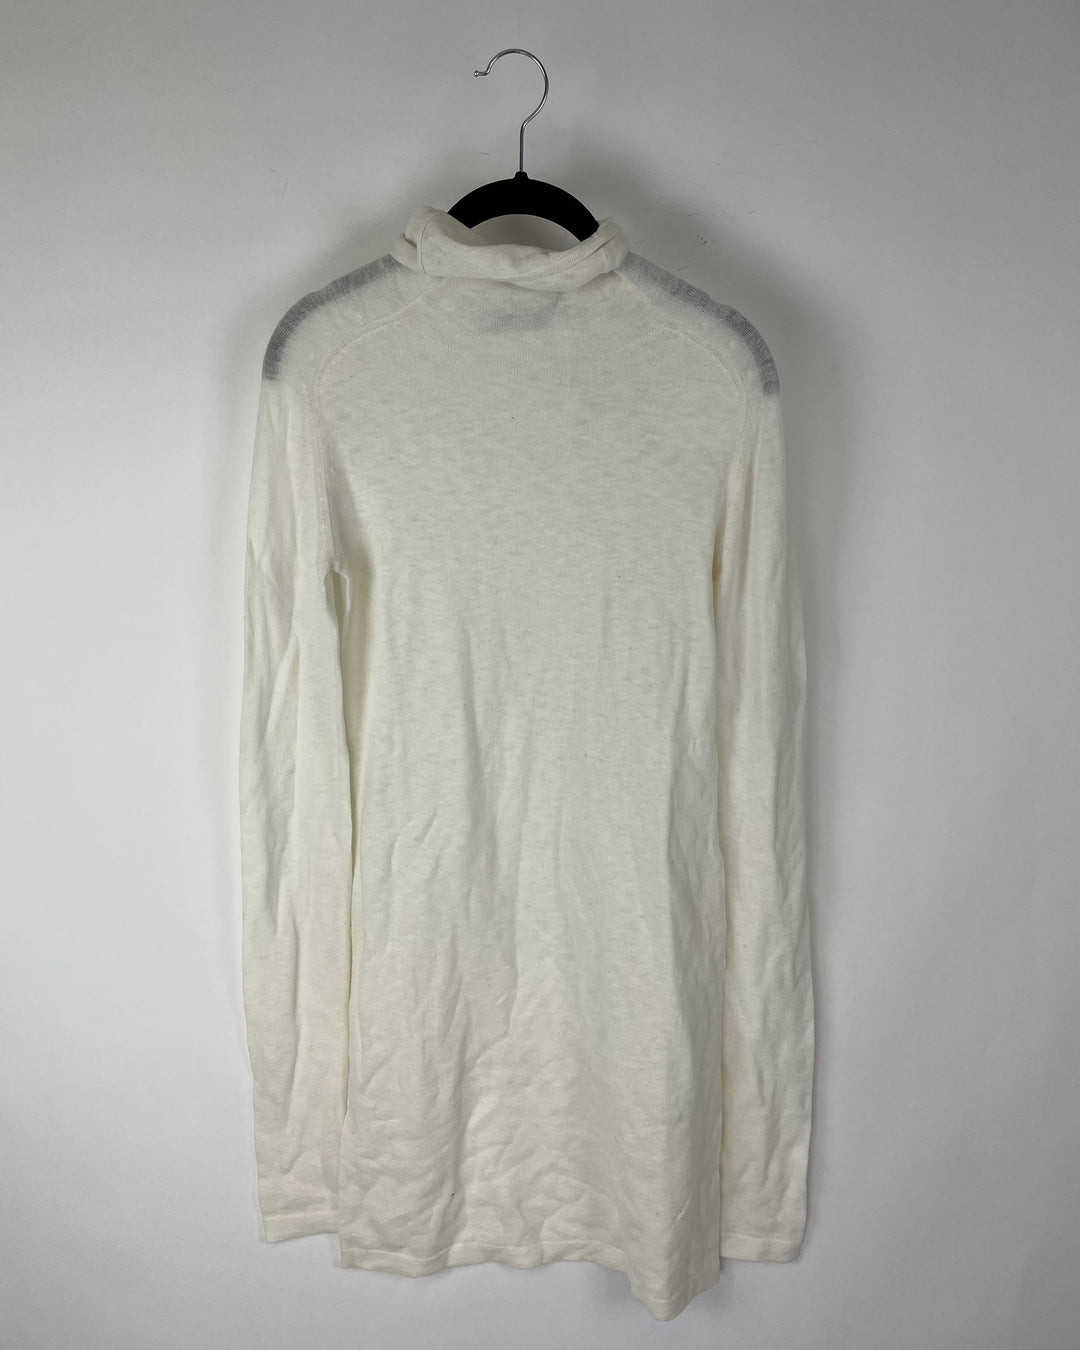 White Long Sleeve Turtle Neck Top - Small